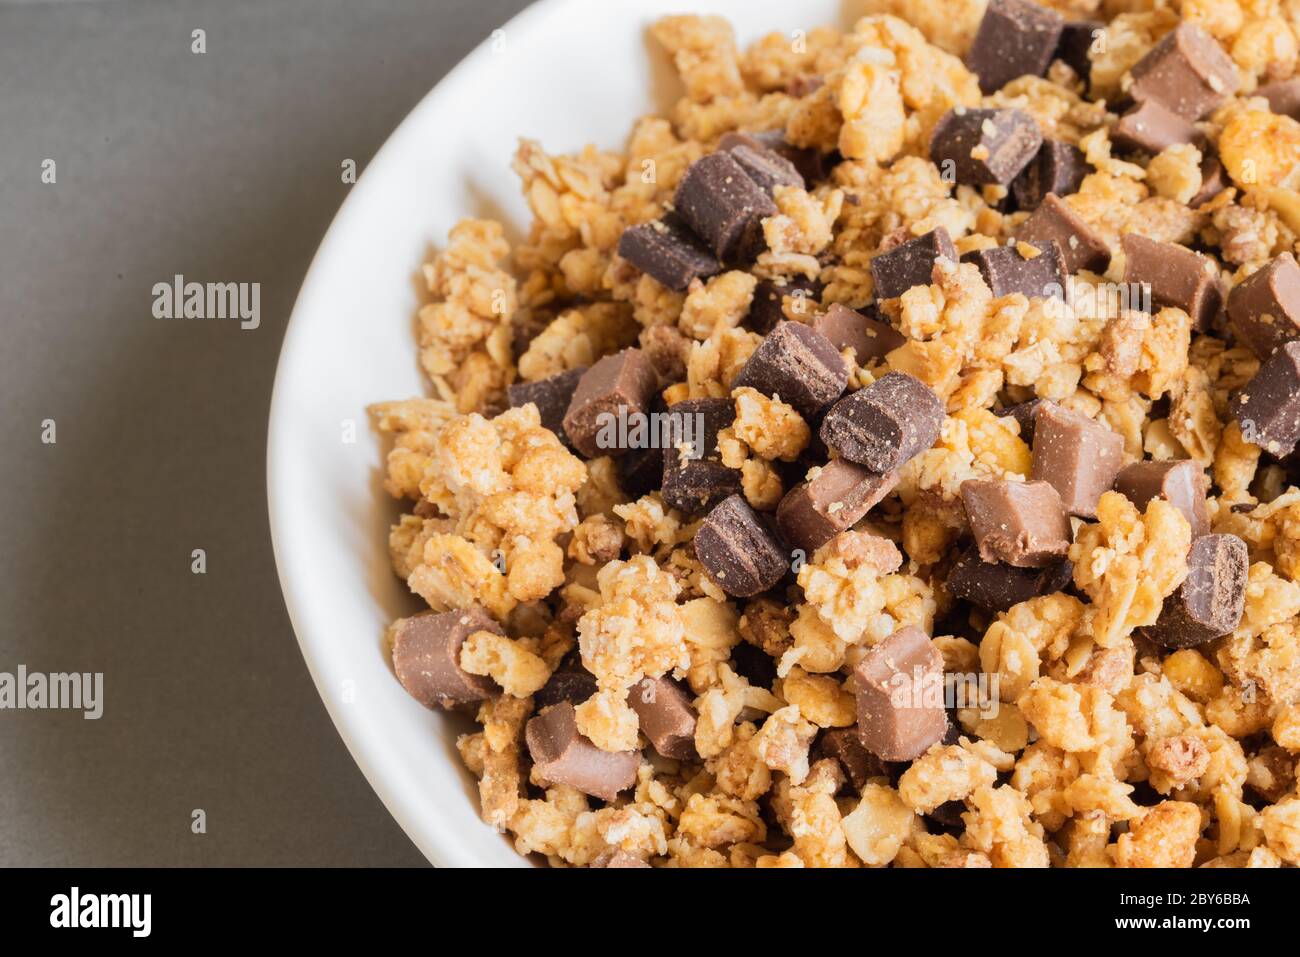 Granola crunchy muesly with pieces of dark and milk chocolate in a bowl on light brown background. Backed muesli. Top view. Macro. Copy space. Stock Photo